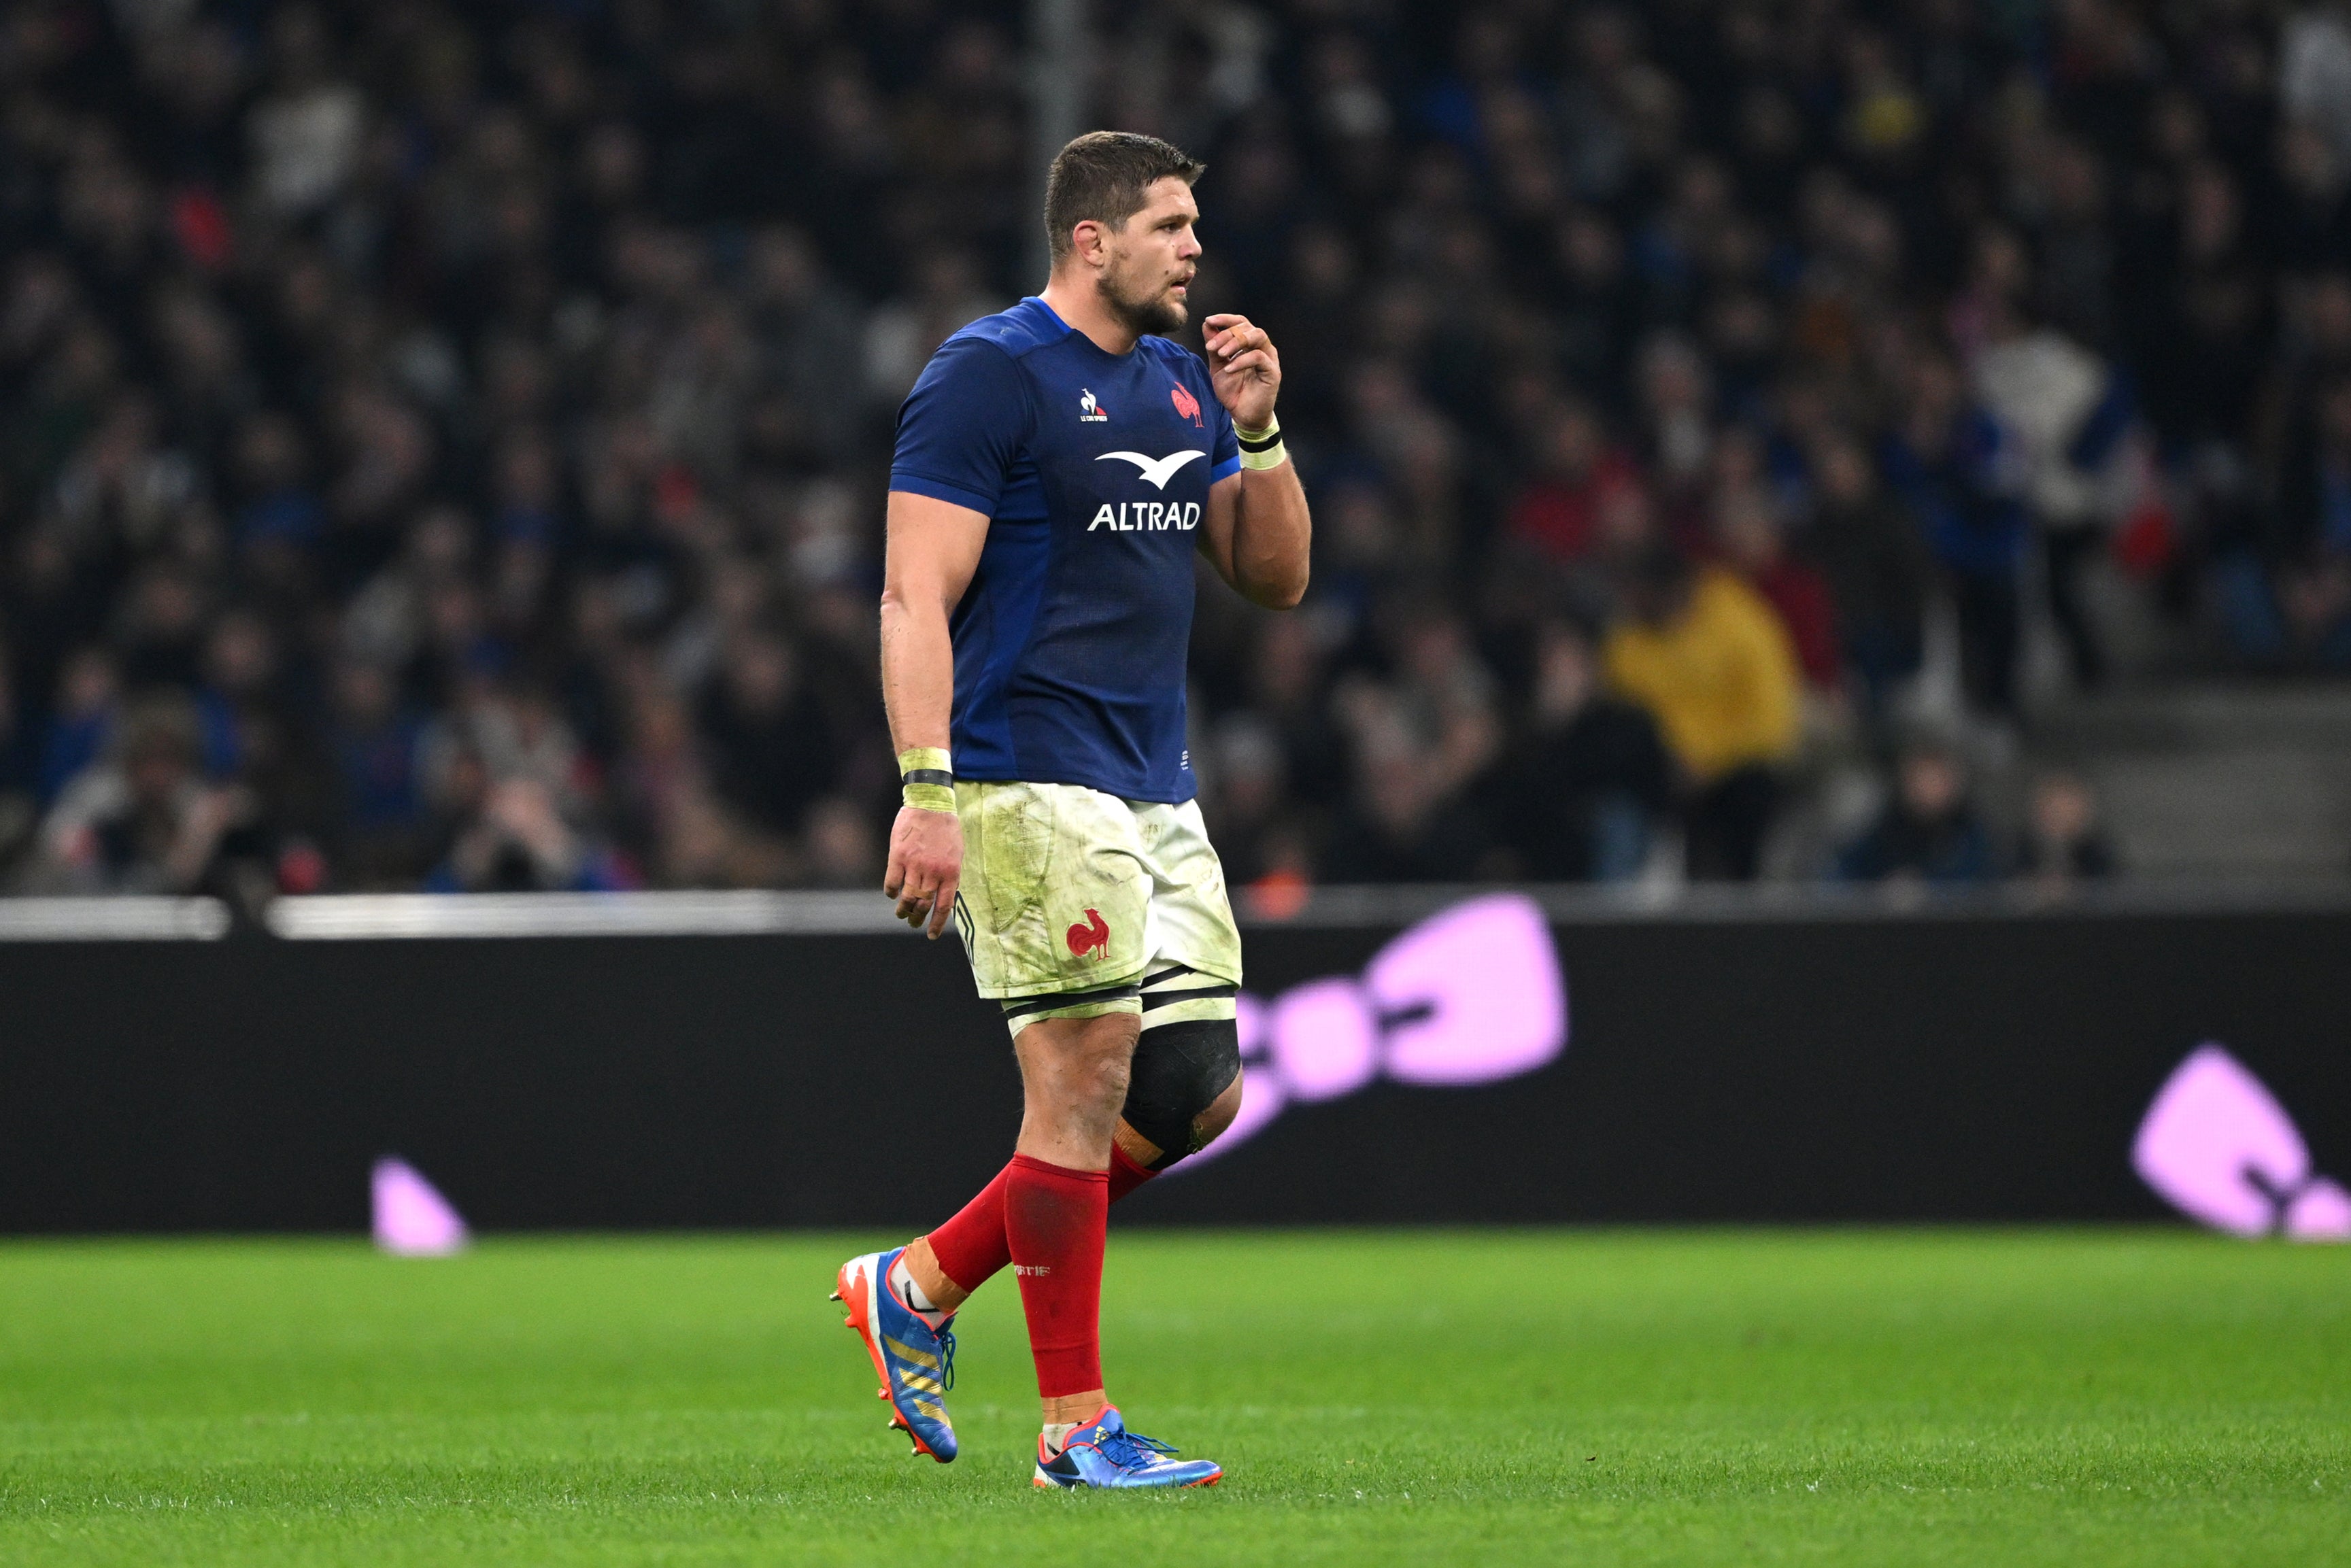 Paul Willemse was sent off in the Six Nations opener